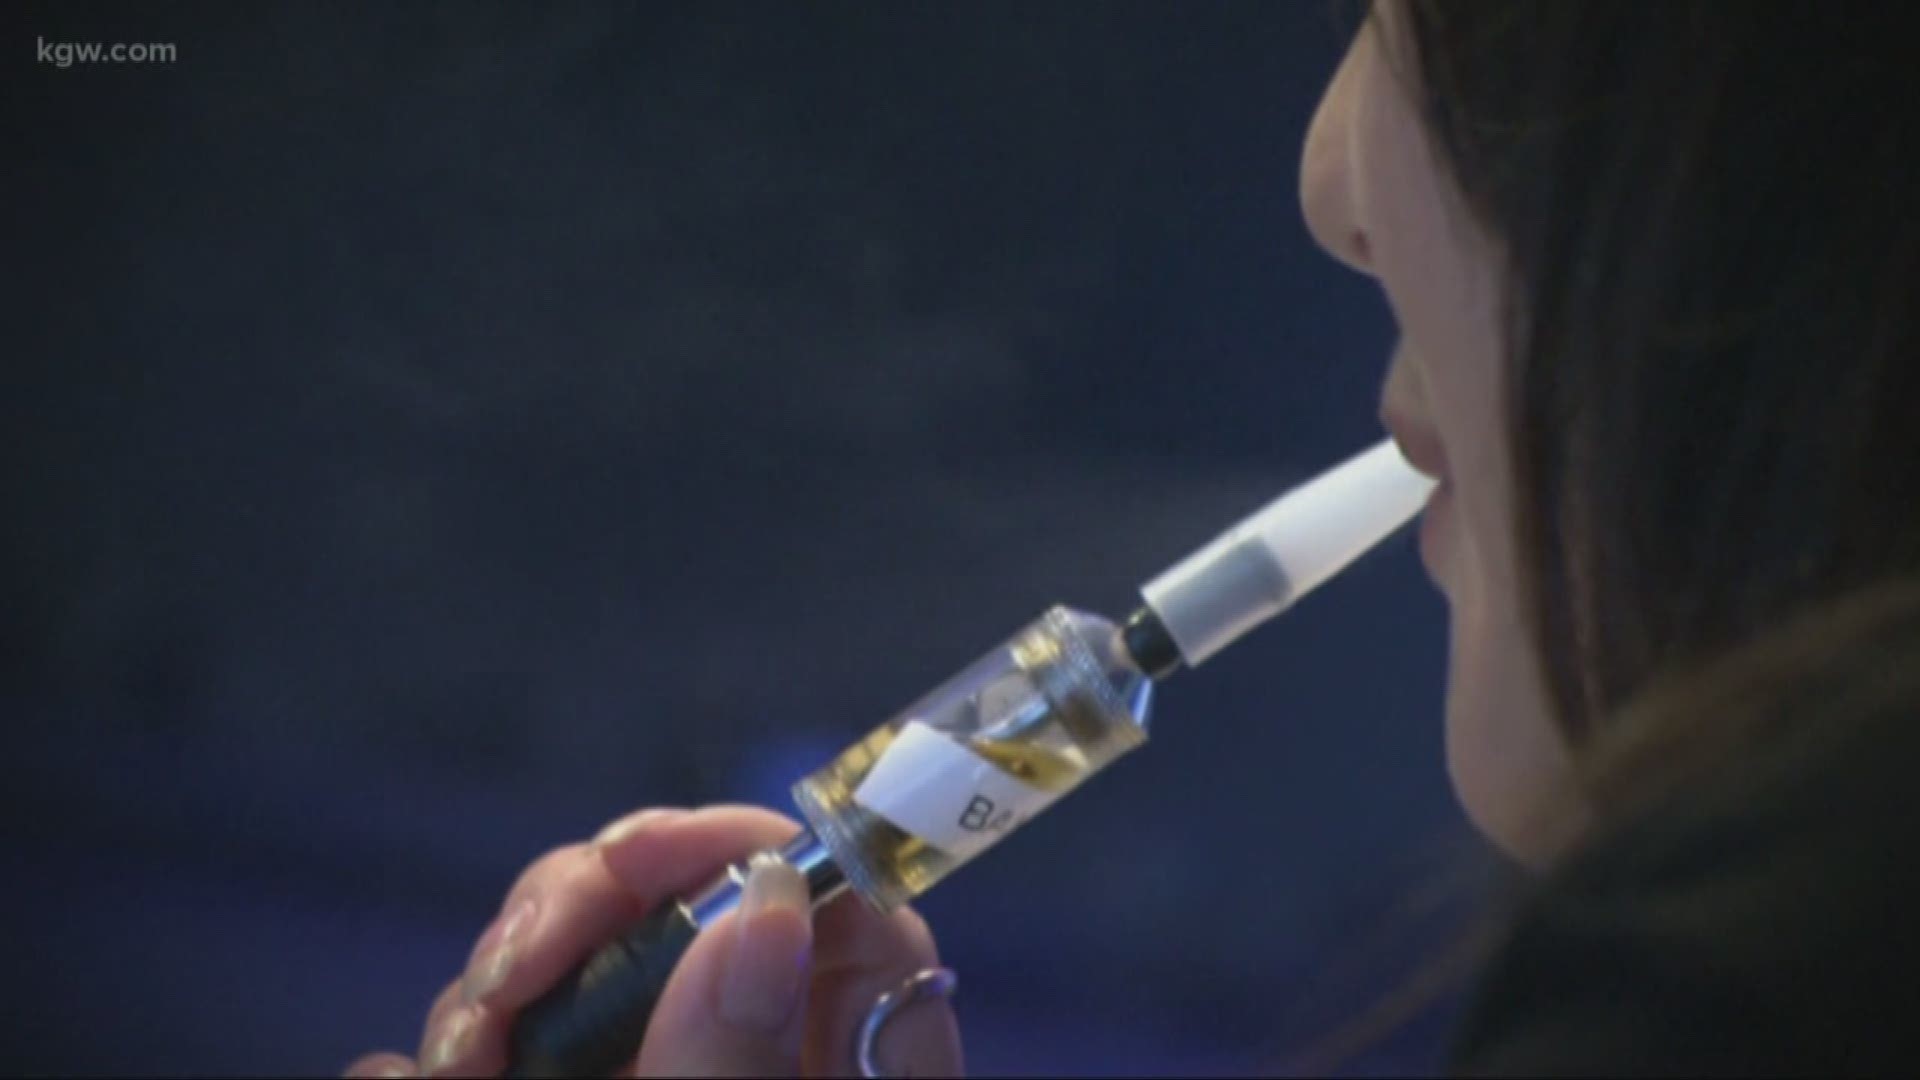 5th case of vaping-related illness in Oregon